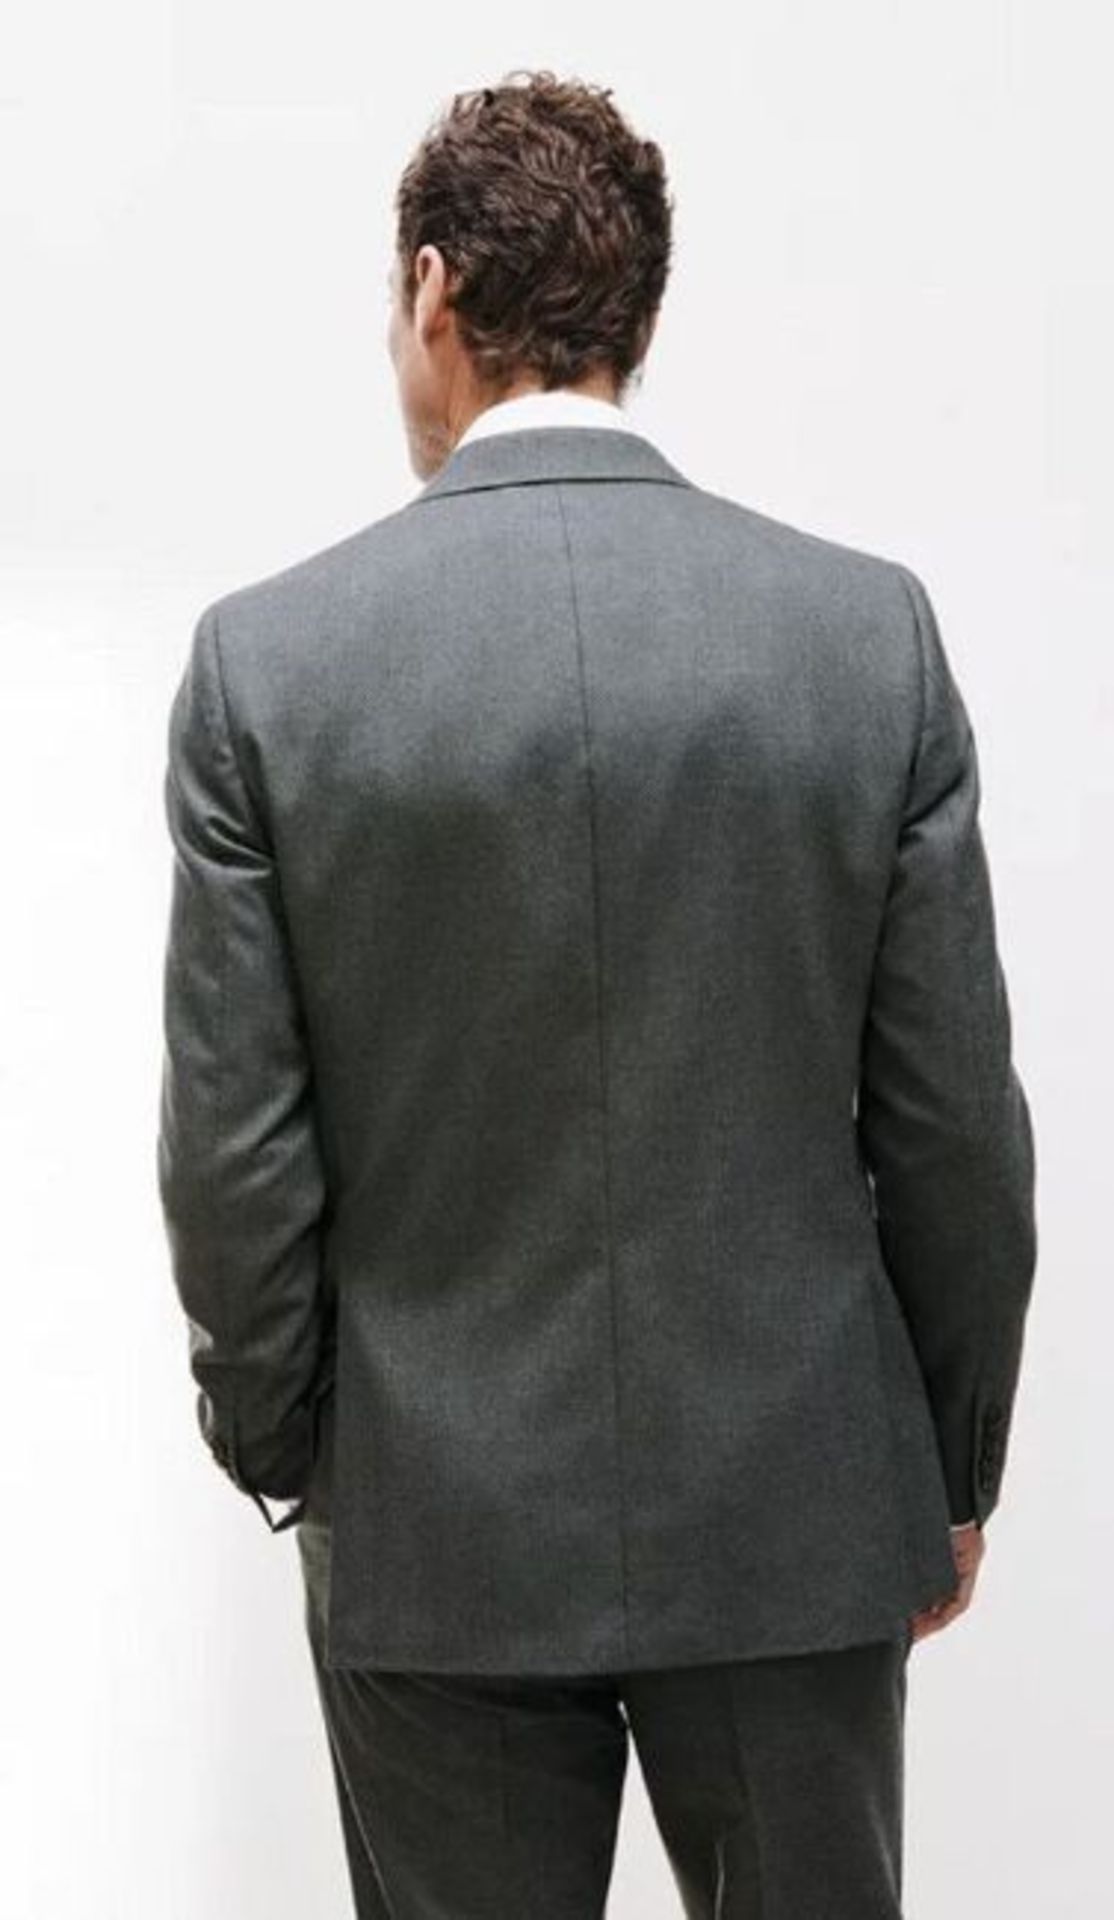 John Lewis Wool Flannel Regular Fit Suit Jacket, Charcoal Size 40R | RRP £170 - Image 3 of 6